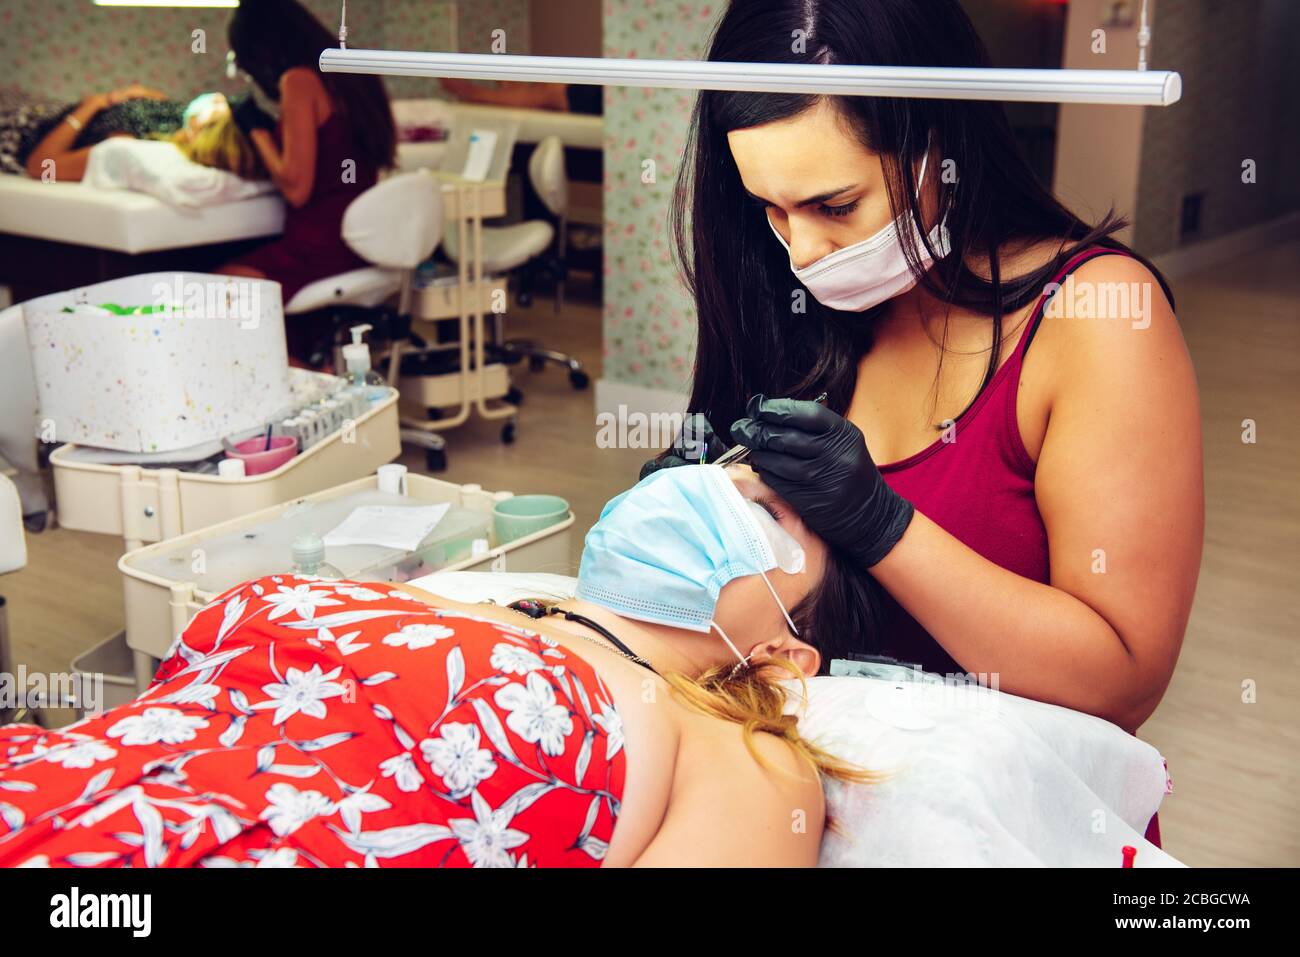 Young long-haired brunette woman putting false eyelashes on lady in beauty salon with masks, new normal Stock Photo